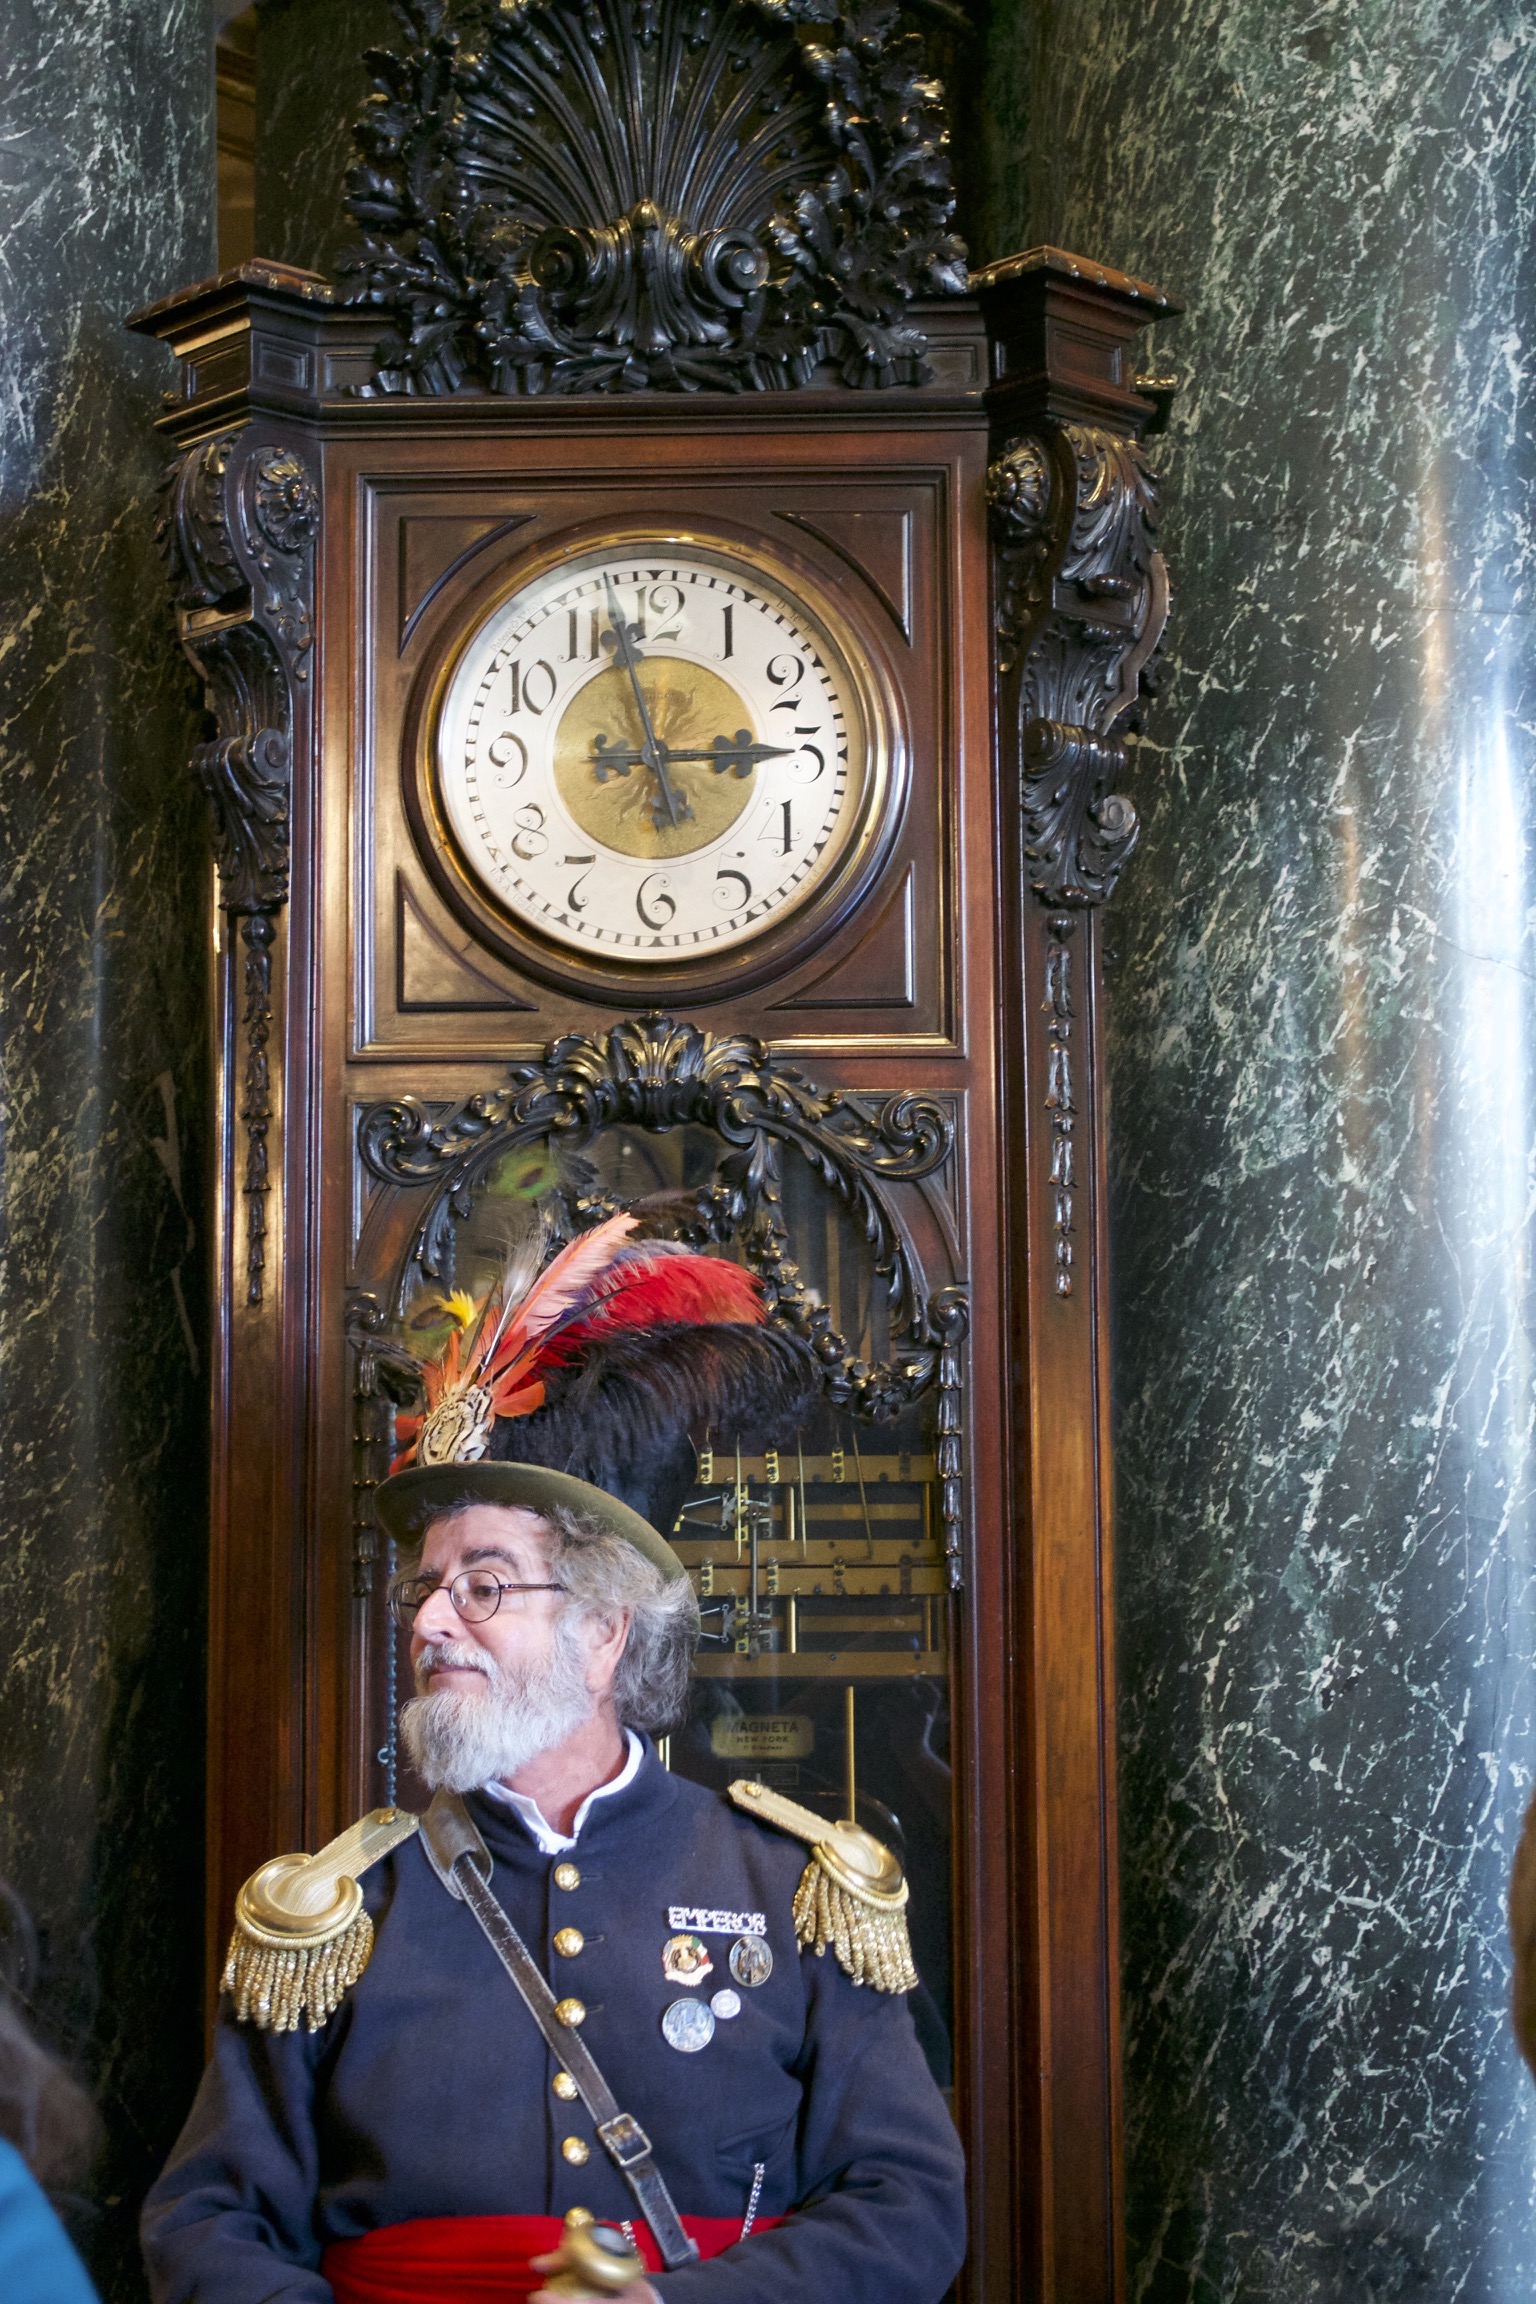 A man in a navy blue officer's jacket with gold epaulets, a red cumberbund, and a feathered top hat stands in front of a huge grandfather clock.